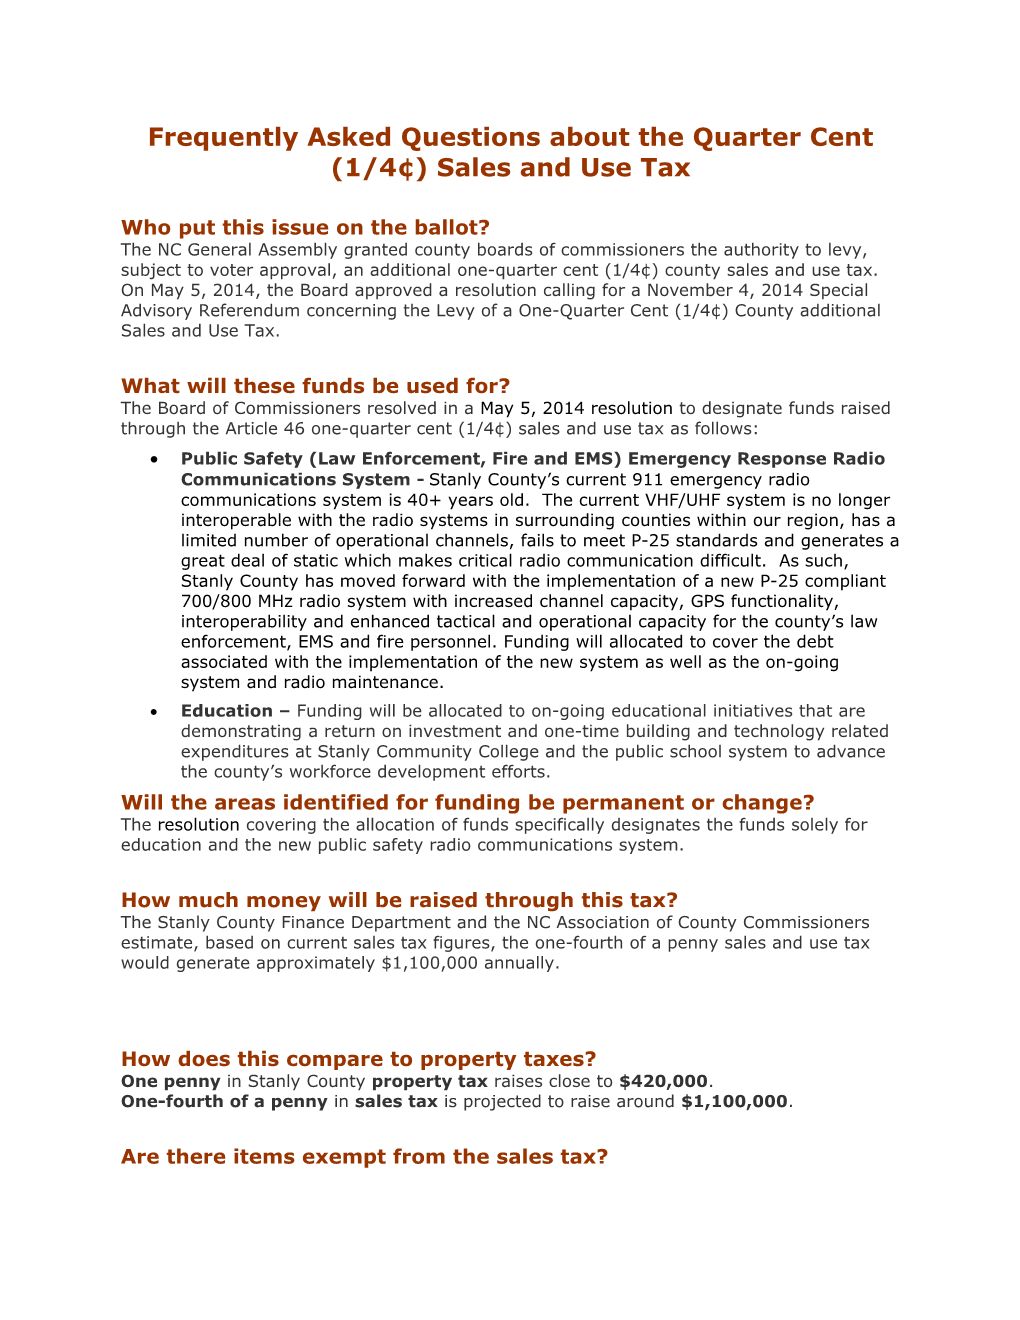 Frequently Asked Questions About the Quarter Cent (1/4 ) Sales and Use Tax